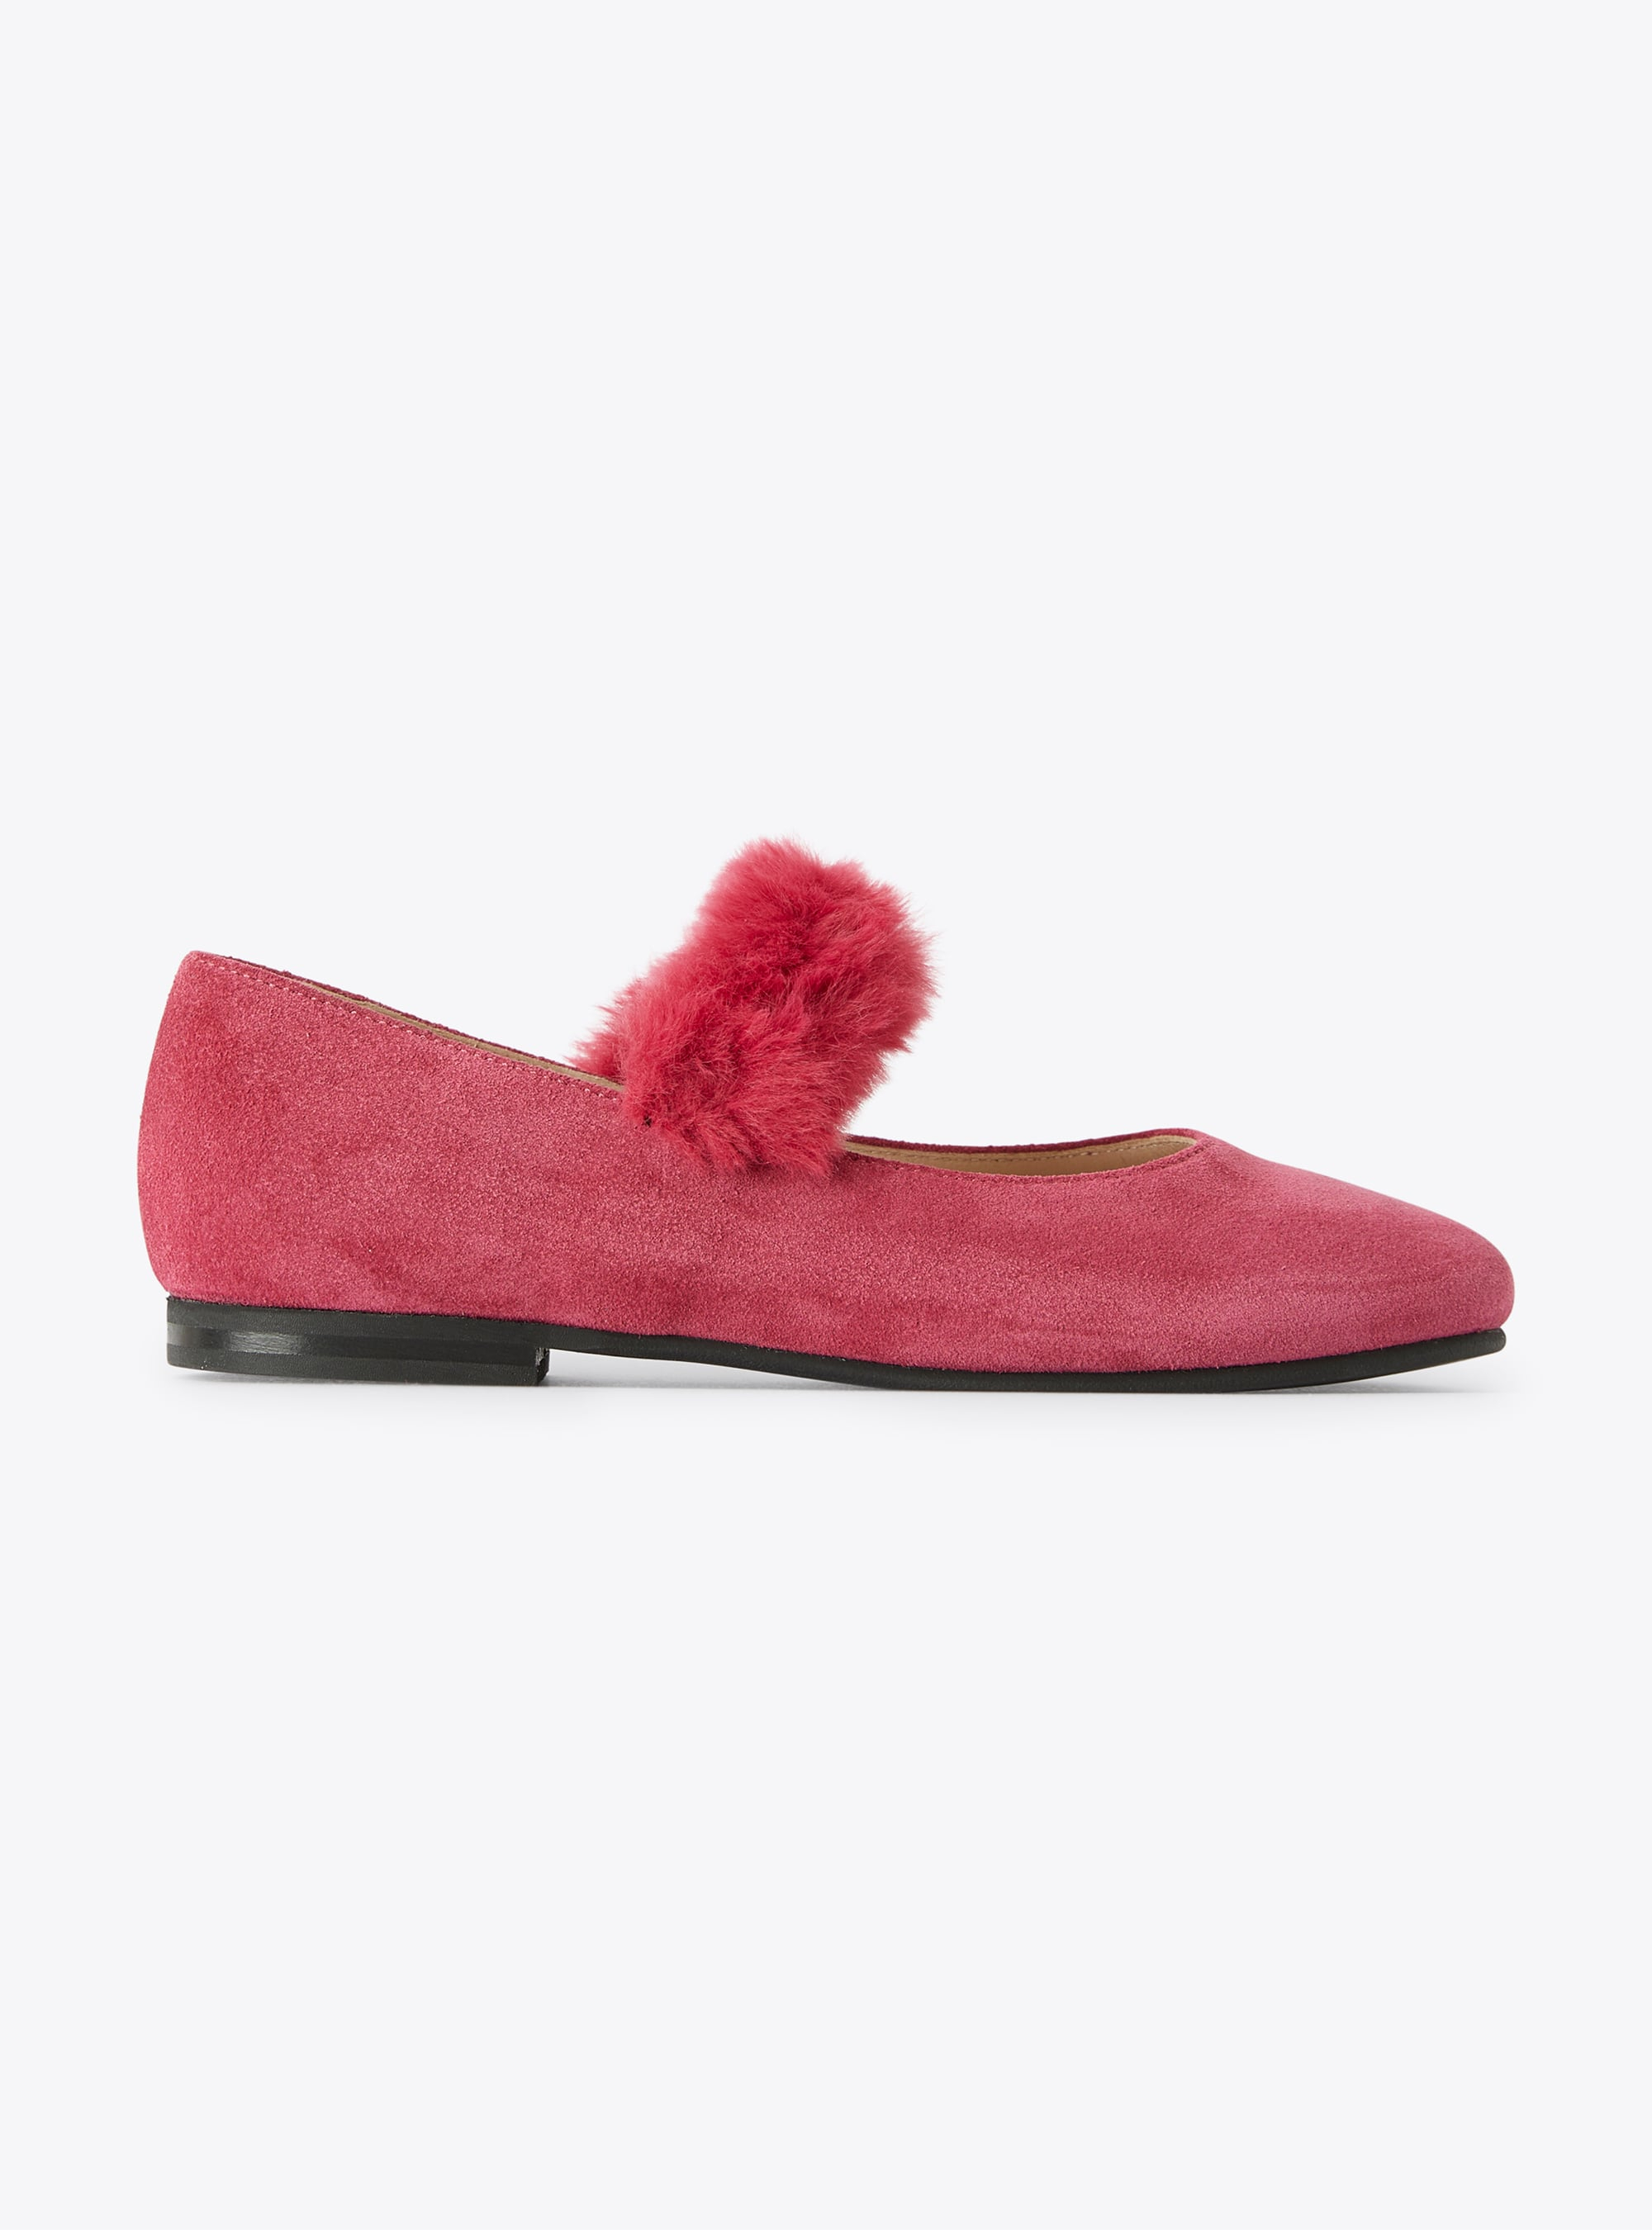 Ballet flat in fuchsia-pink suede - Shoes - Il Gufo